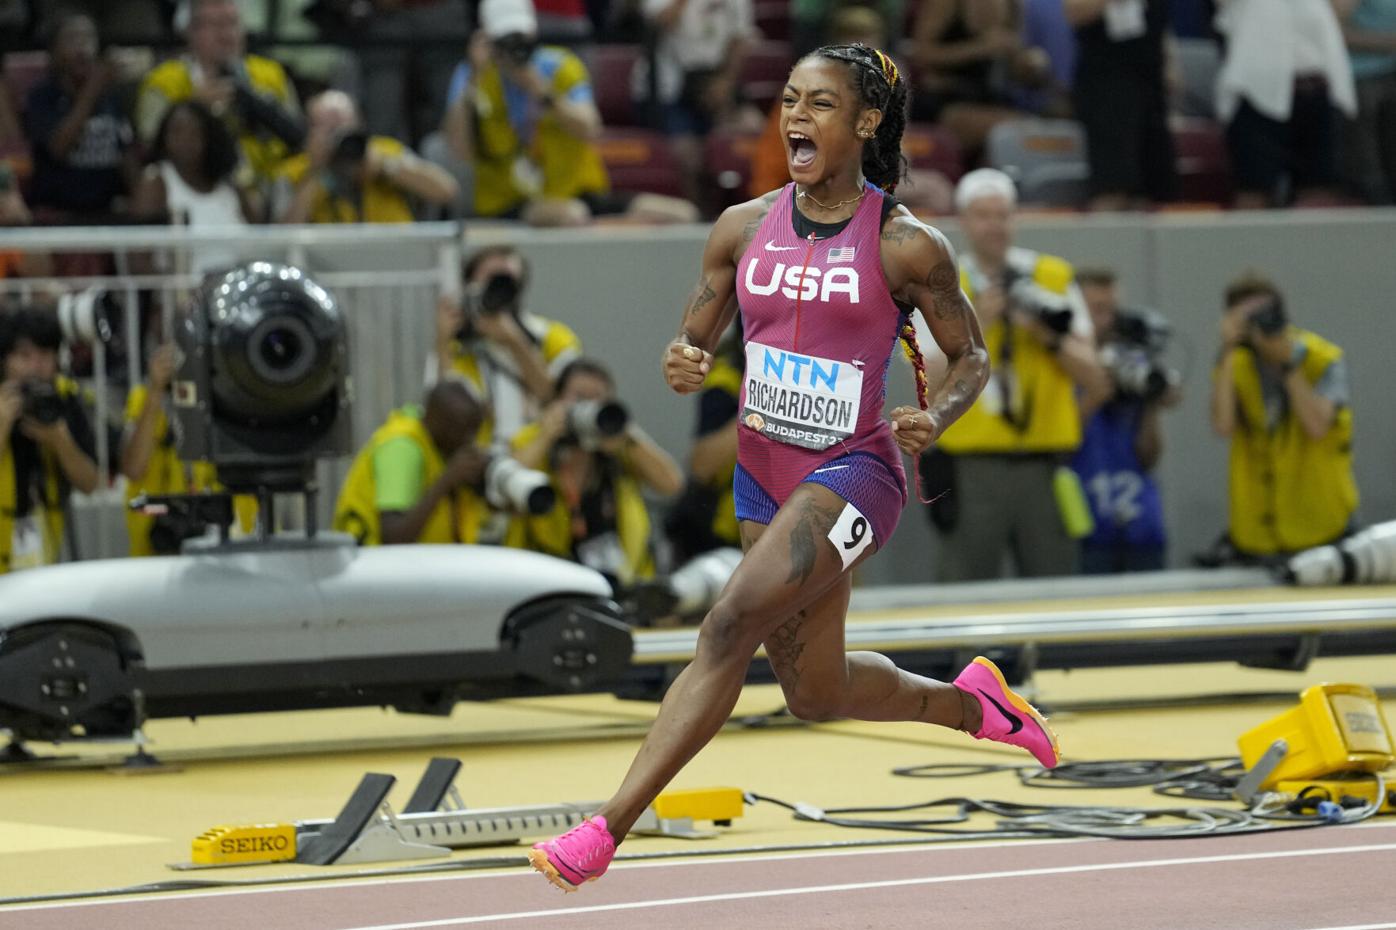 Sprinting to Success: From HBCU Athlete to Global Champion